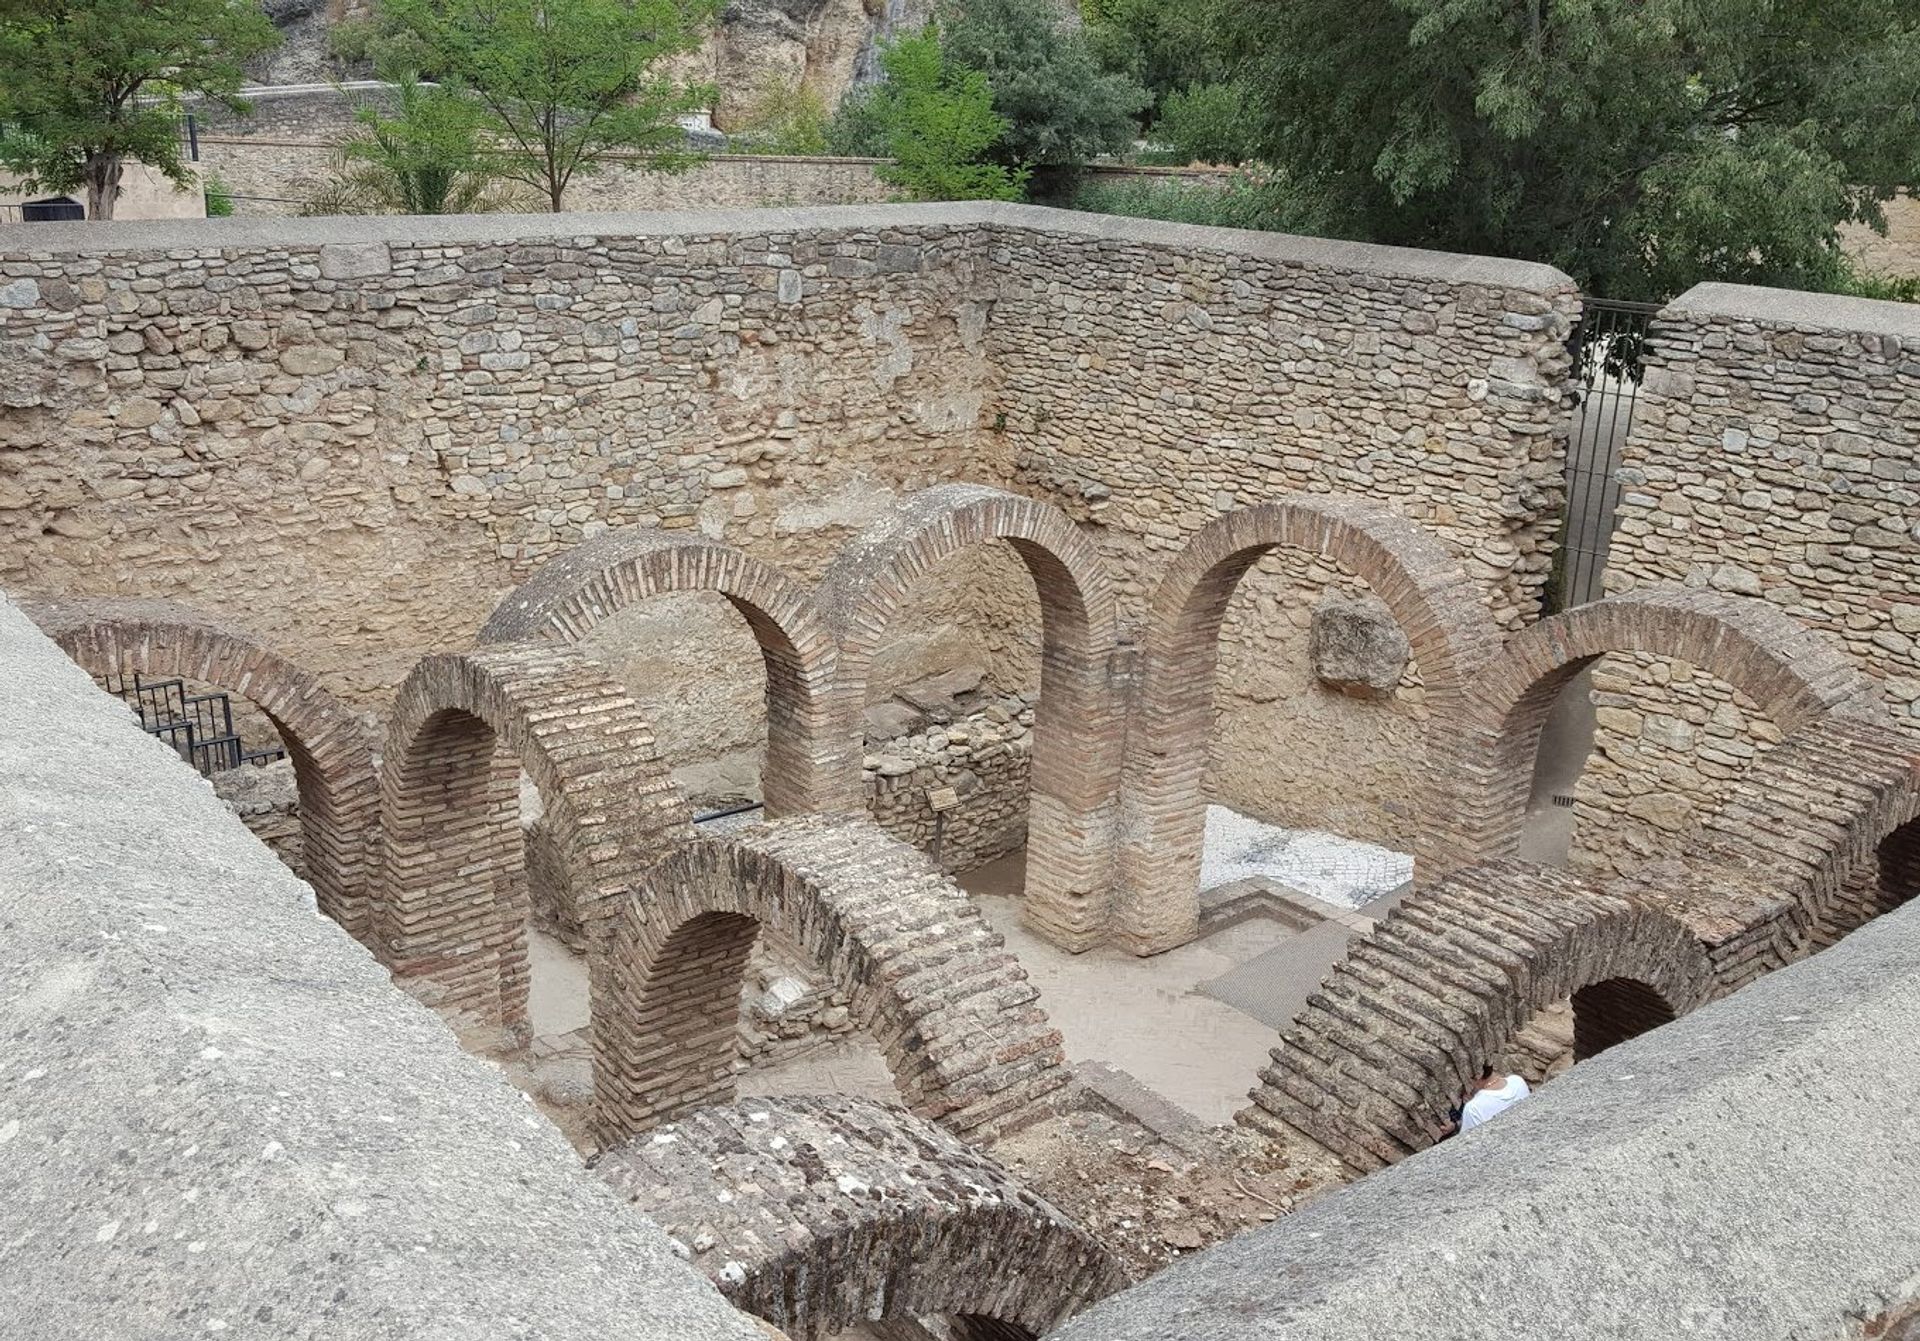 Remains of the Arab baths in Ronda